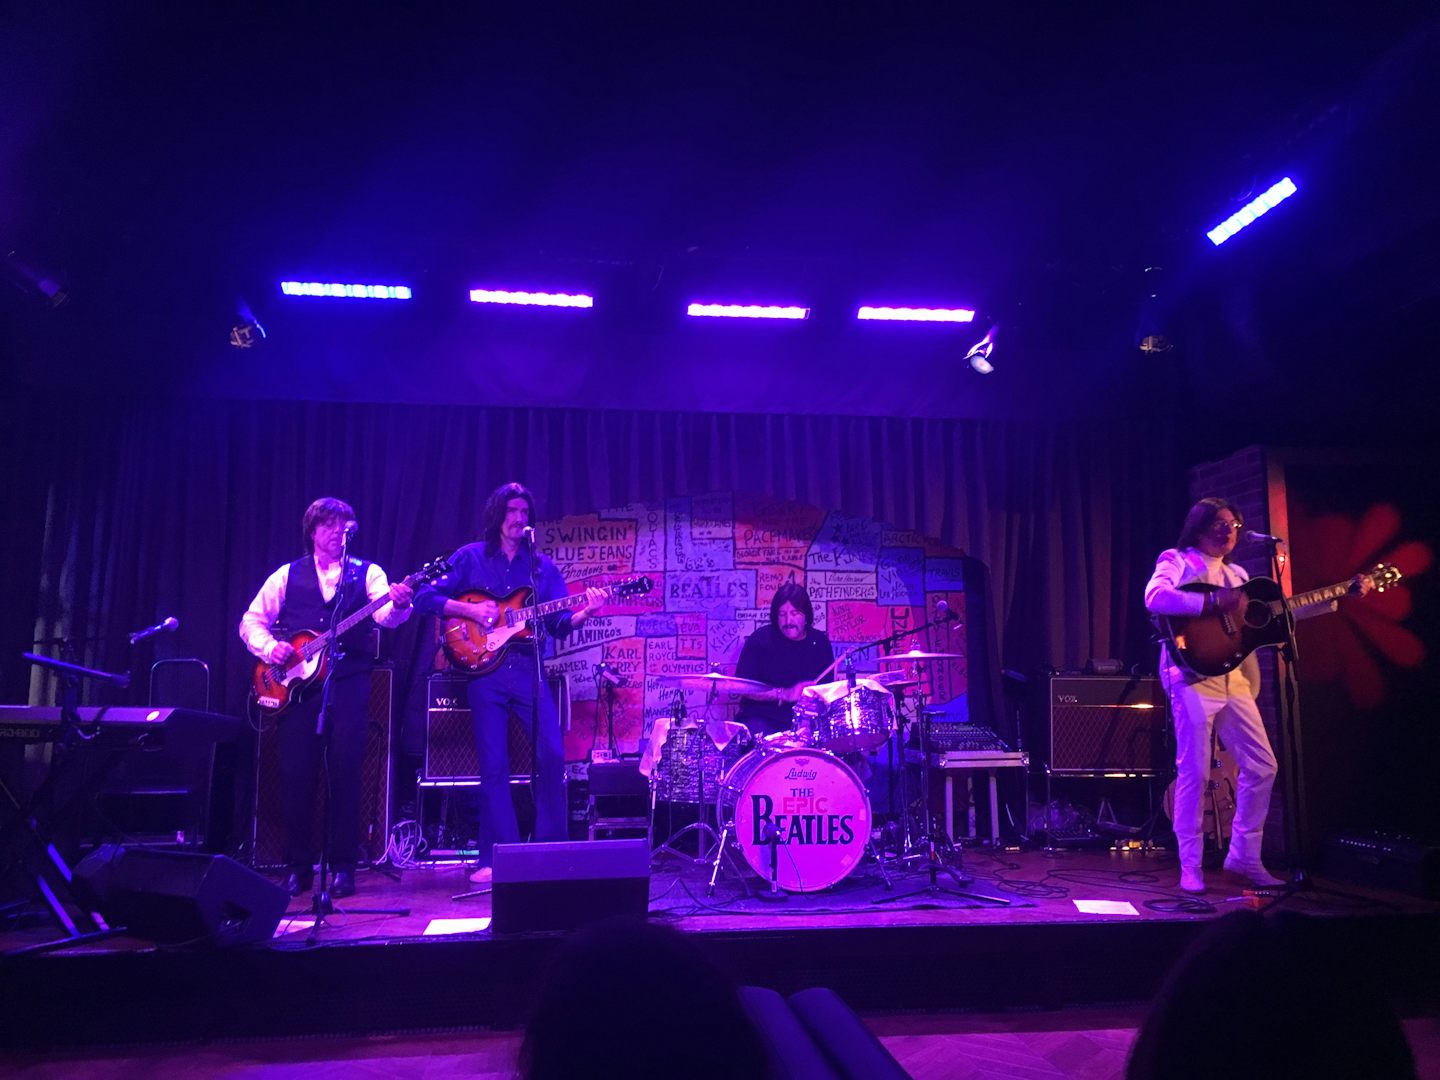 "The Epic Beatles" performing their Abby Road set (August 19, 2017) at The Cavern. 
Excellent show! Highly recommend. These guys were awesome and truly made my trip!